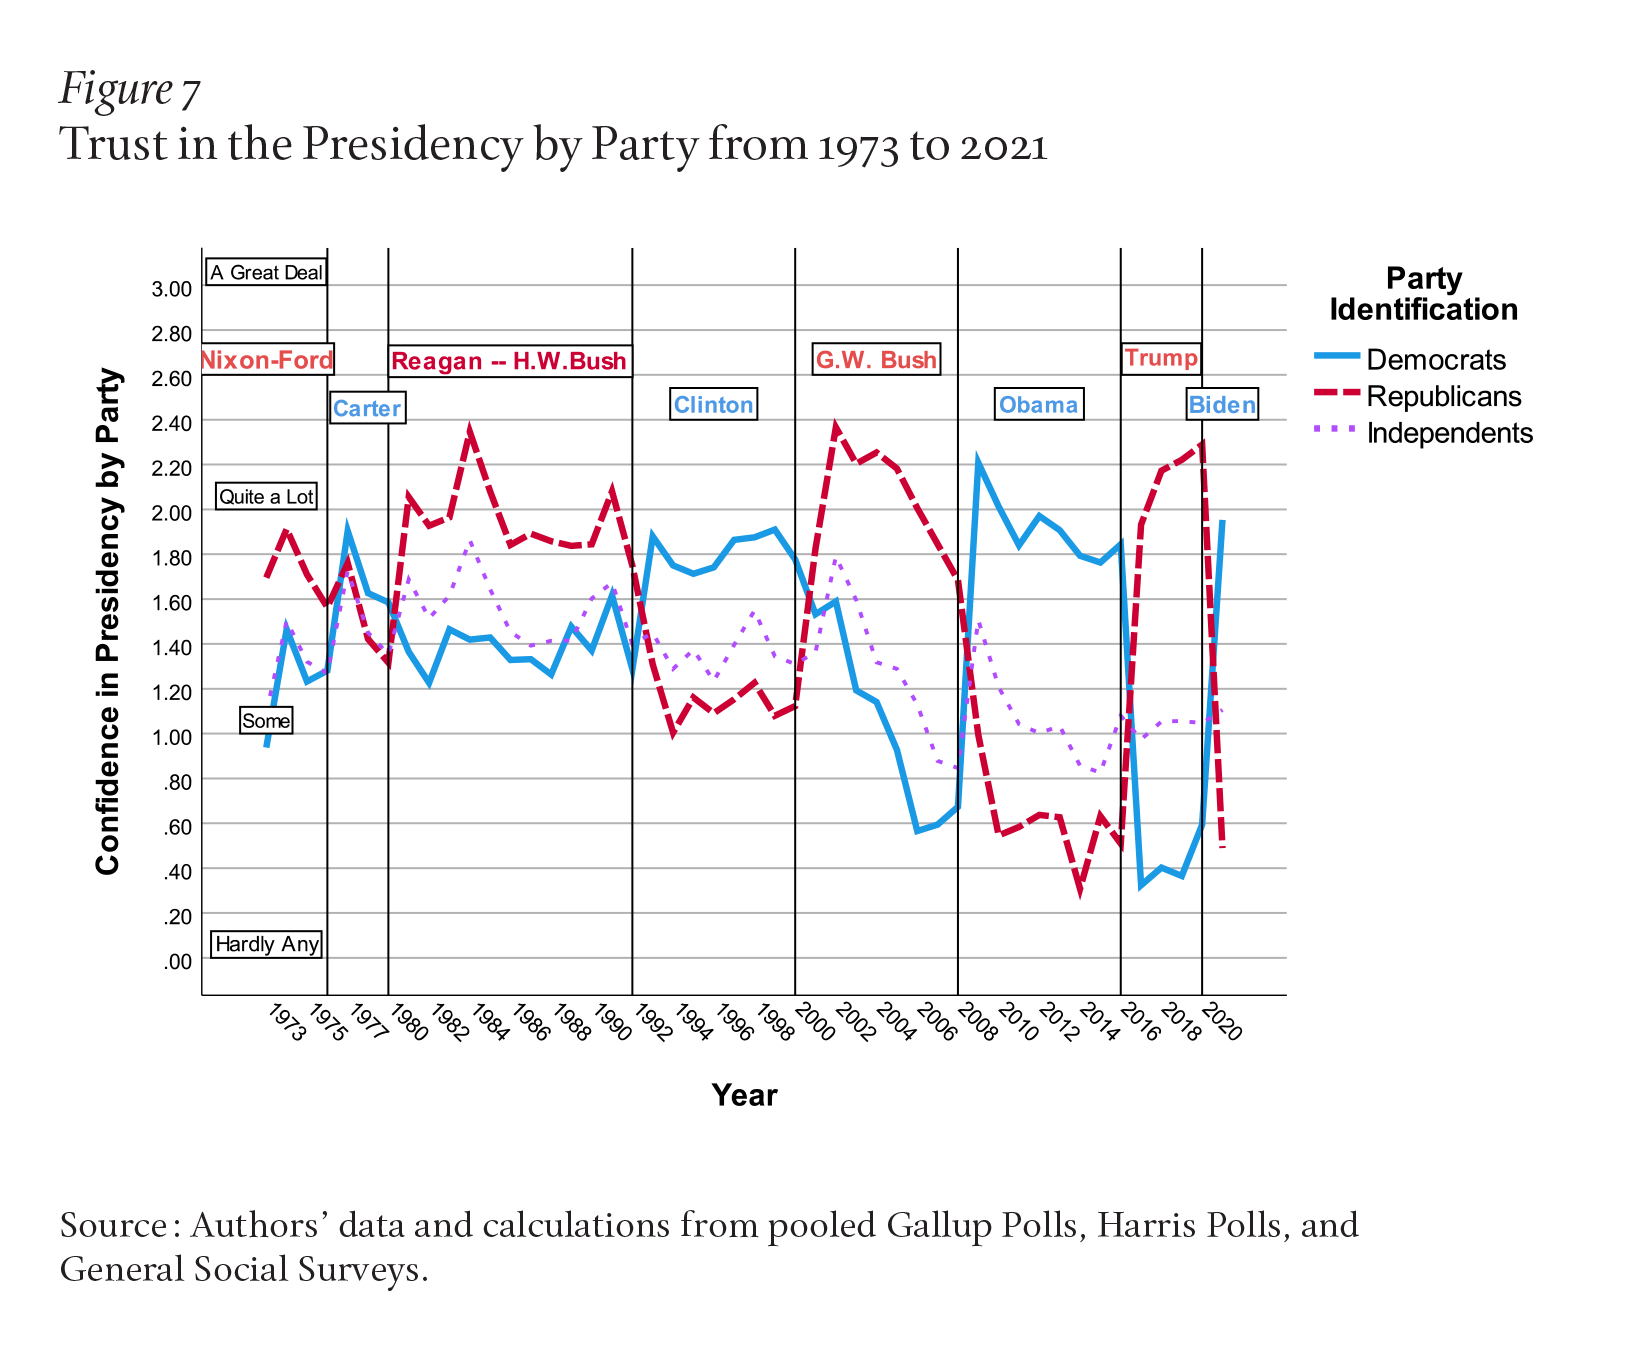 Figure 7 shows that partisans trust the presidency more when it is held by a member of their party. Trust falls significantly among partisans when the opposing party takes the presidency.